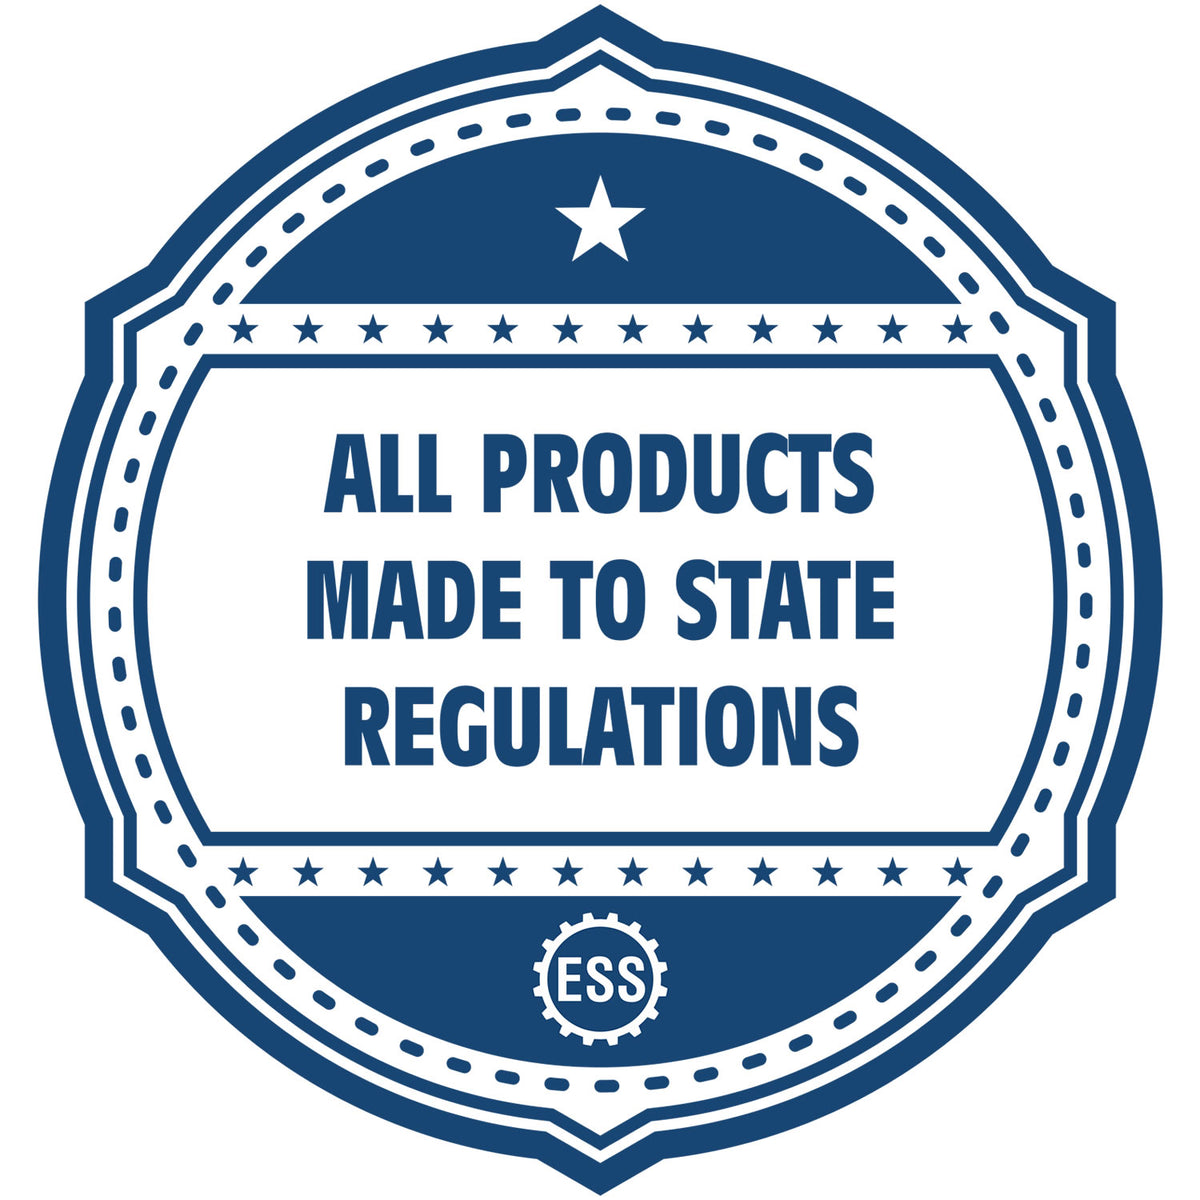 An icon or badge element for the Handheld Rhode Island Architect Seal Embosser showing that this product is made in compliance with state regulations.